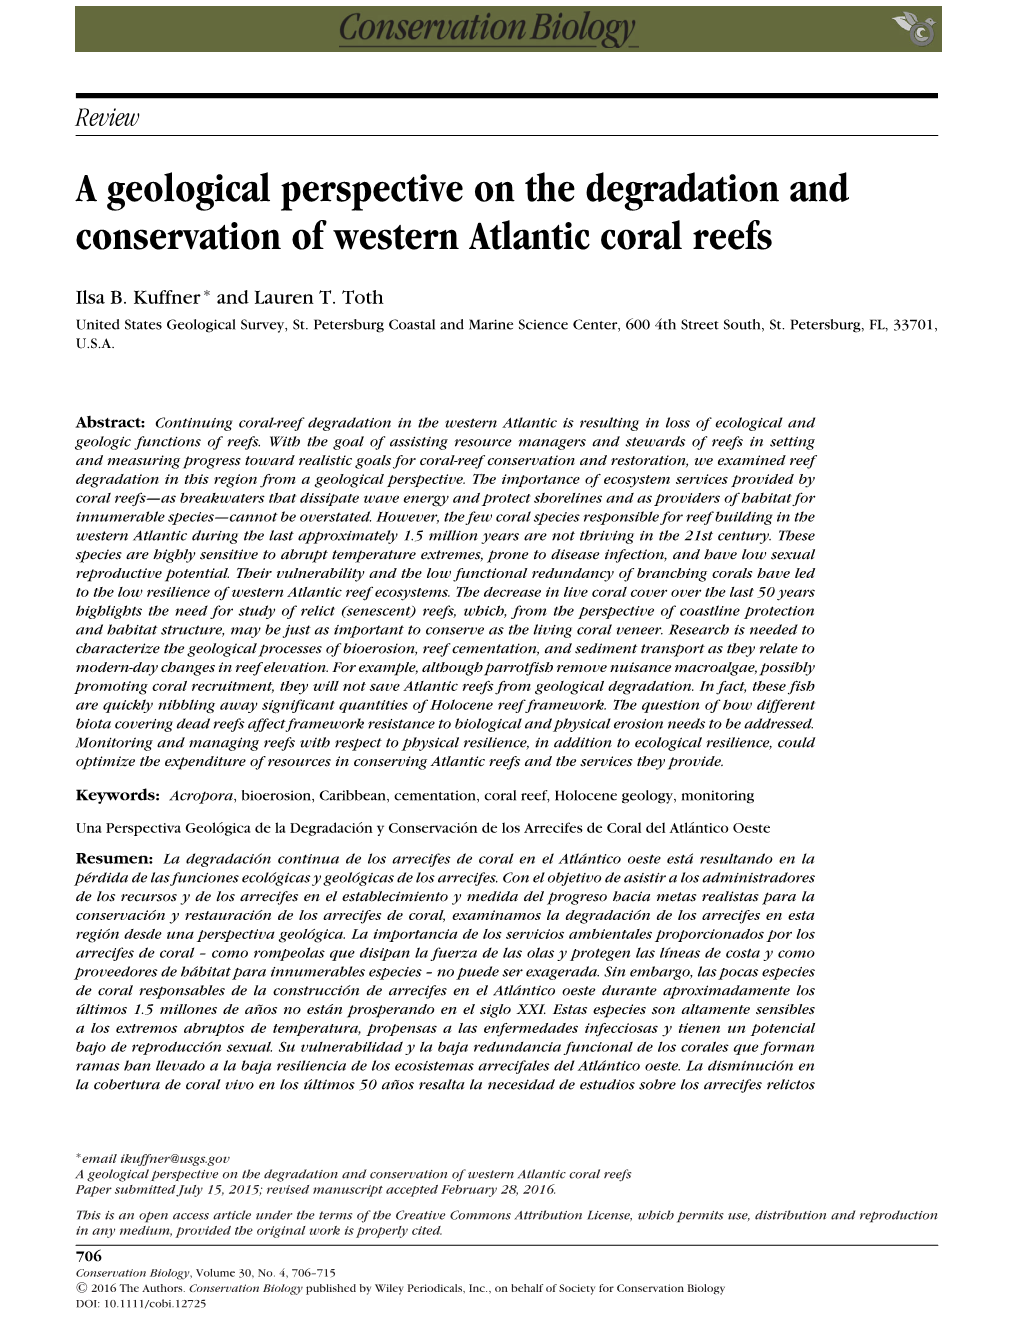 A Geological Perspective on the Degradation and Conservation of Western Atlantic Coral Reefs